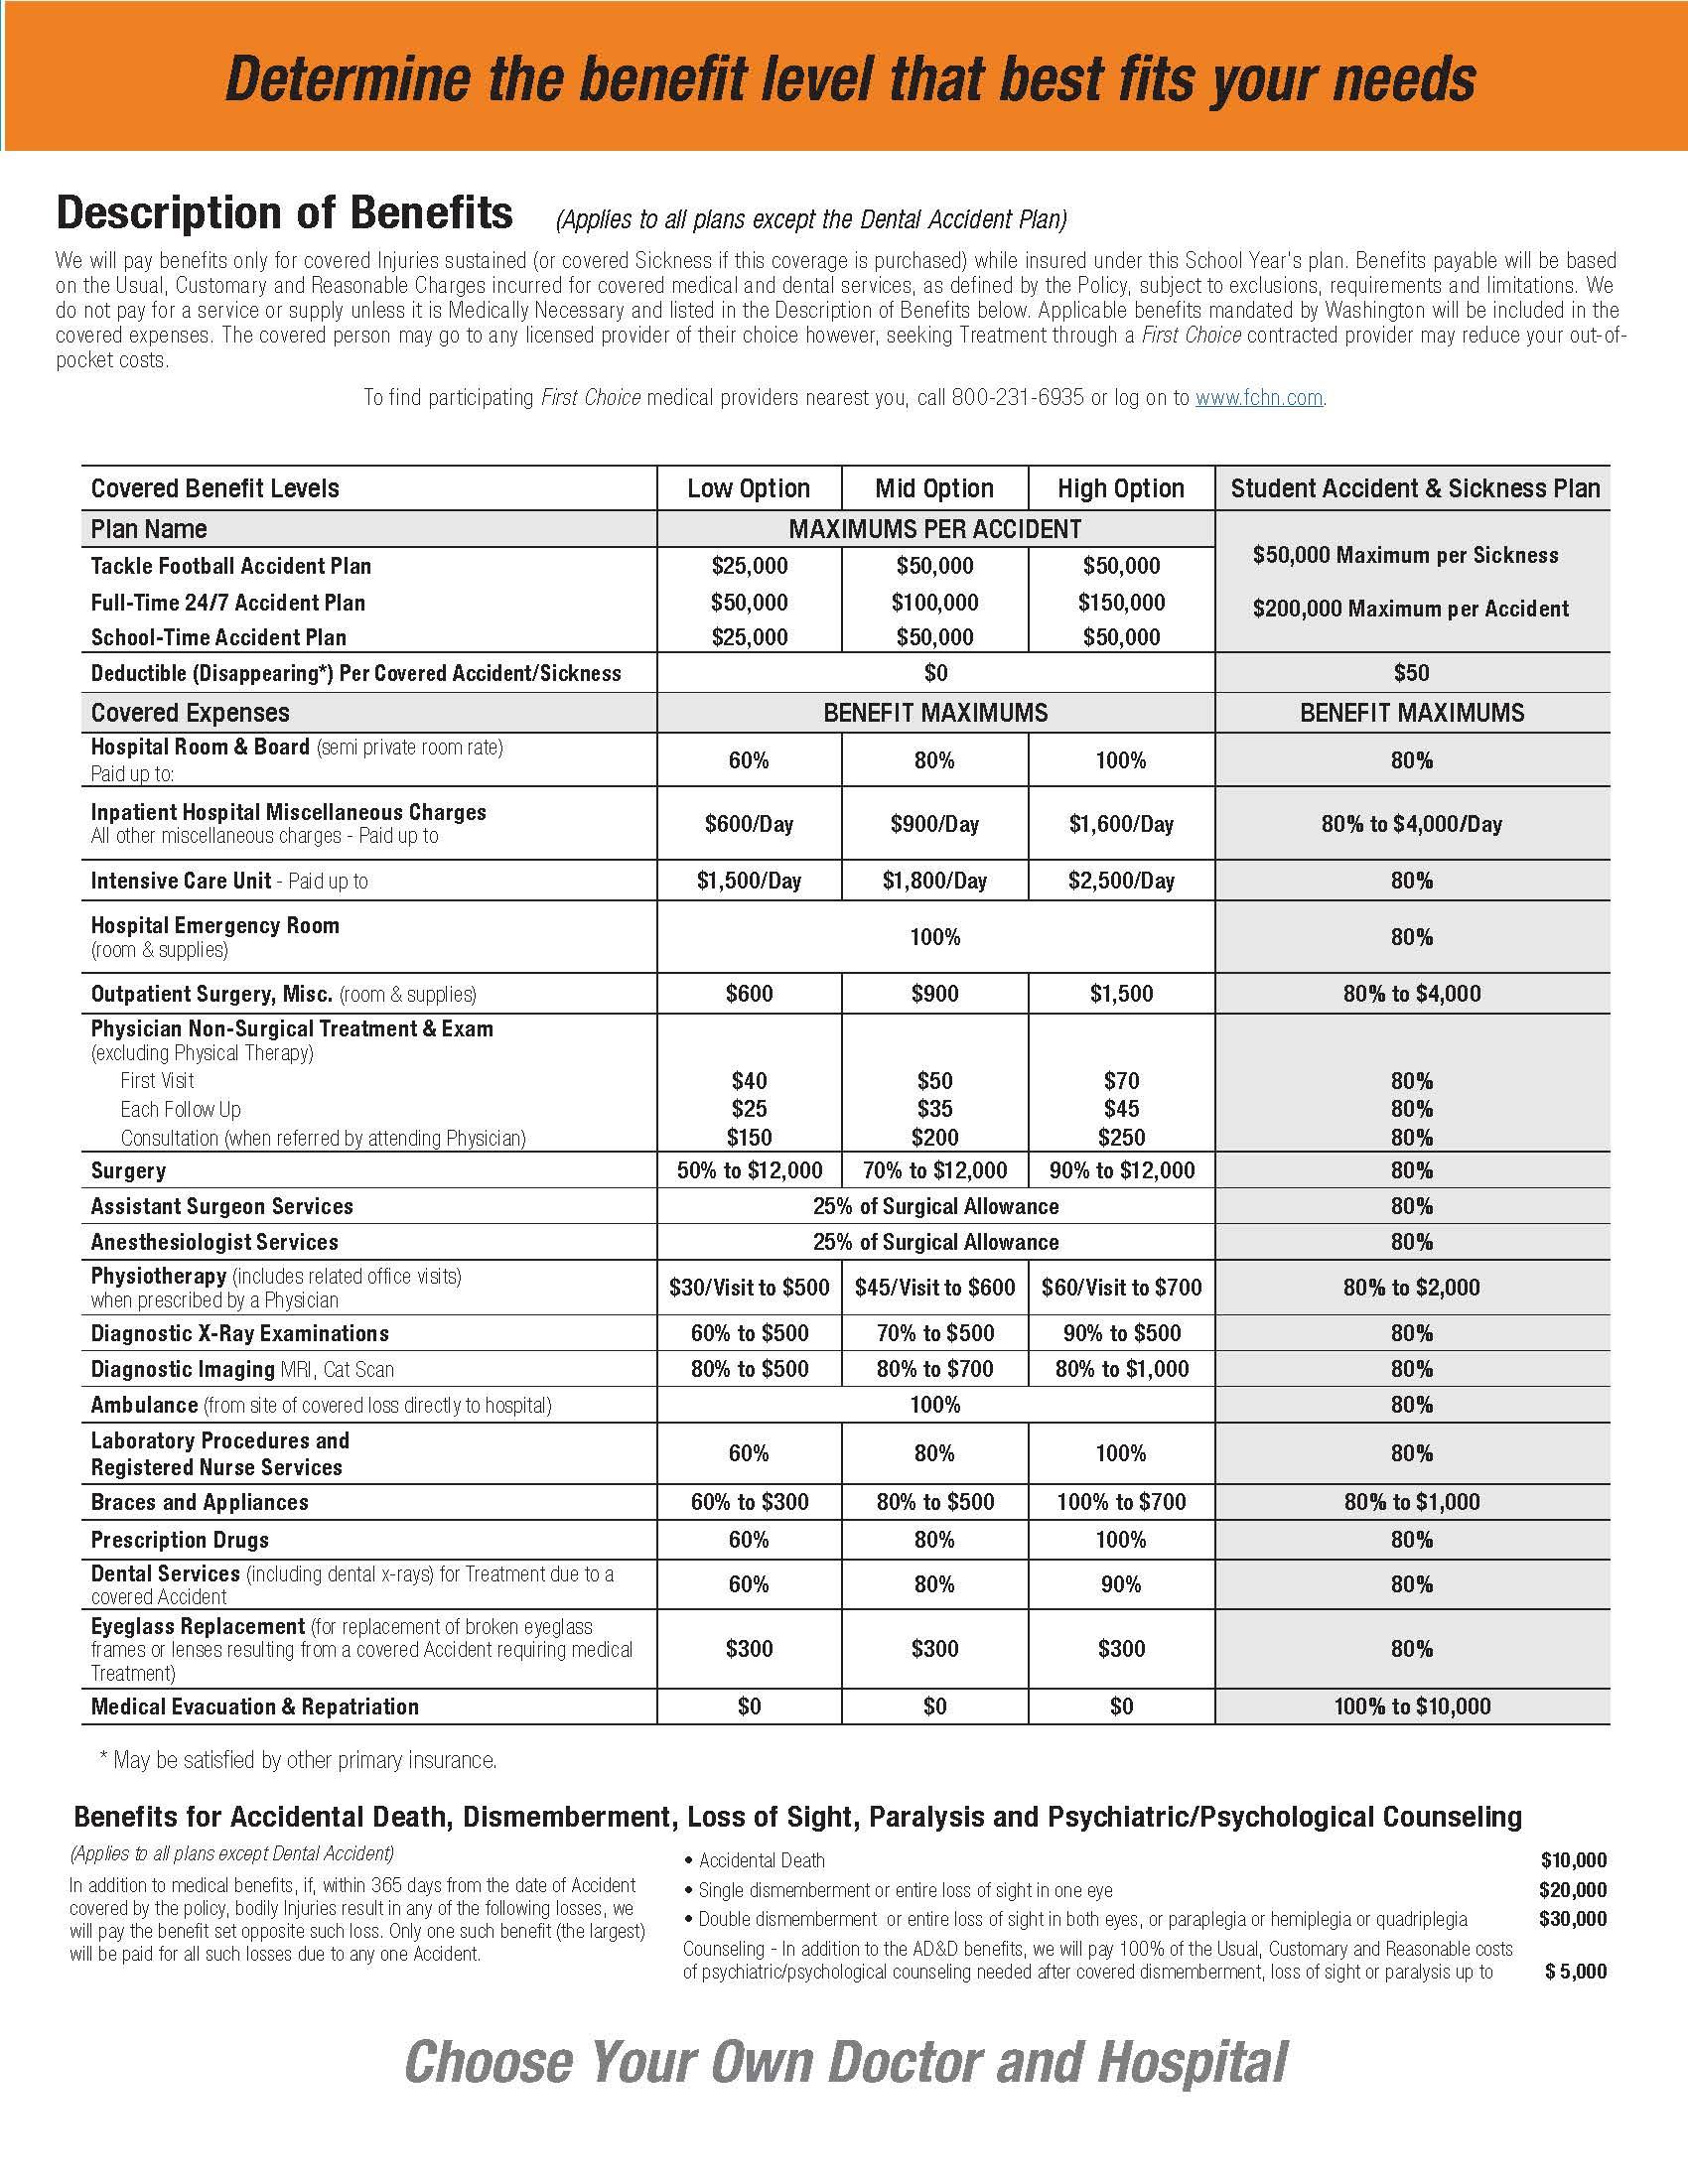 Supplemental Insurance page 3